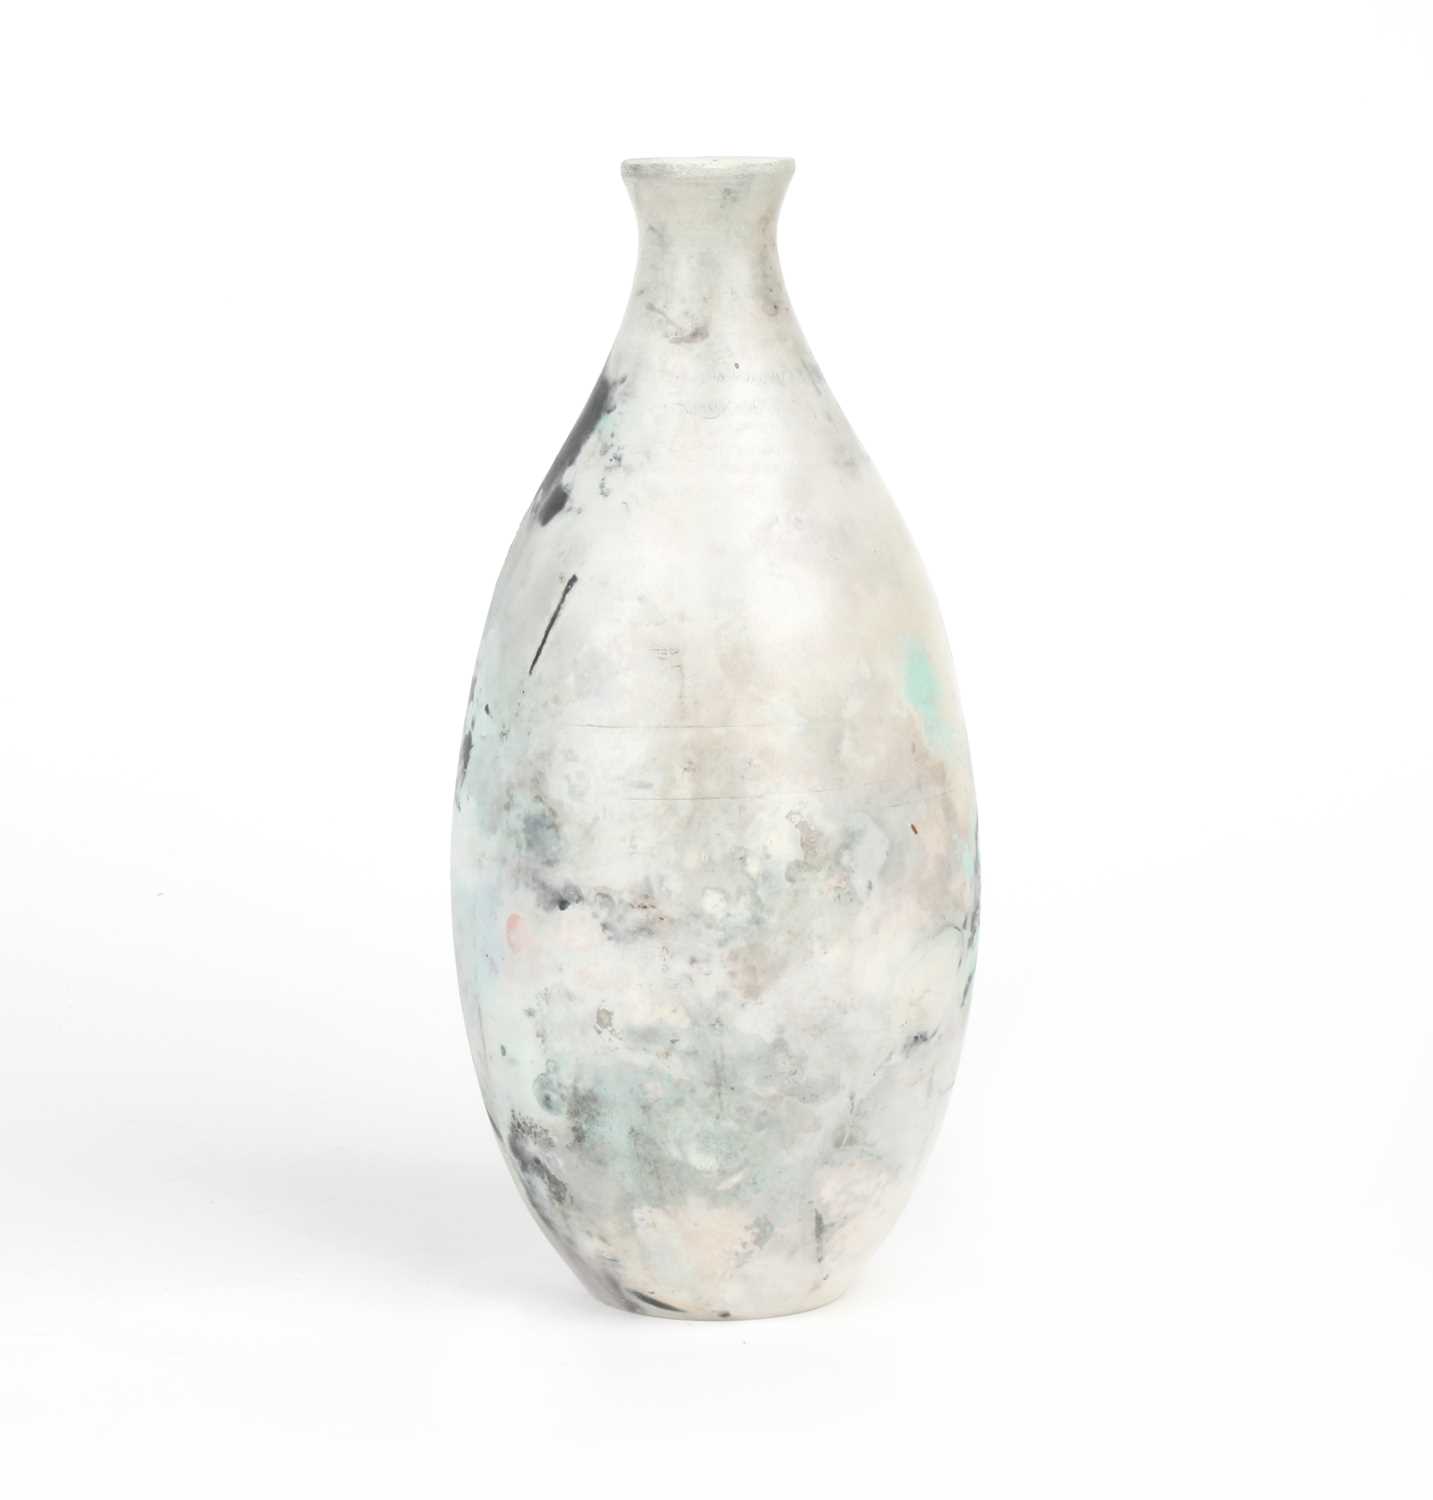 Kit Andrews "The Cornish Potter" (British, Contemporary) Pit-Fired Vessel - Image 3 of 6